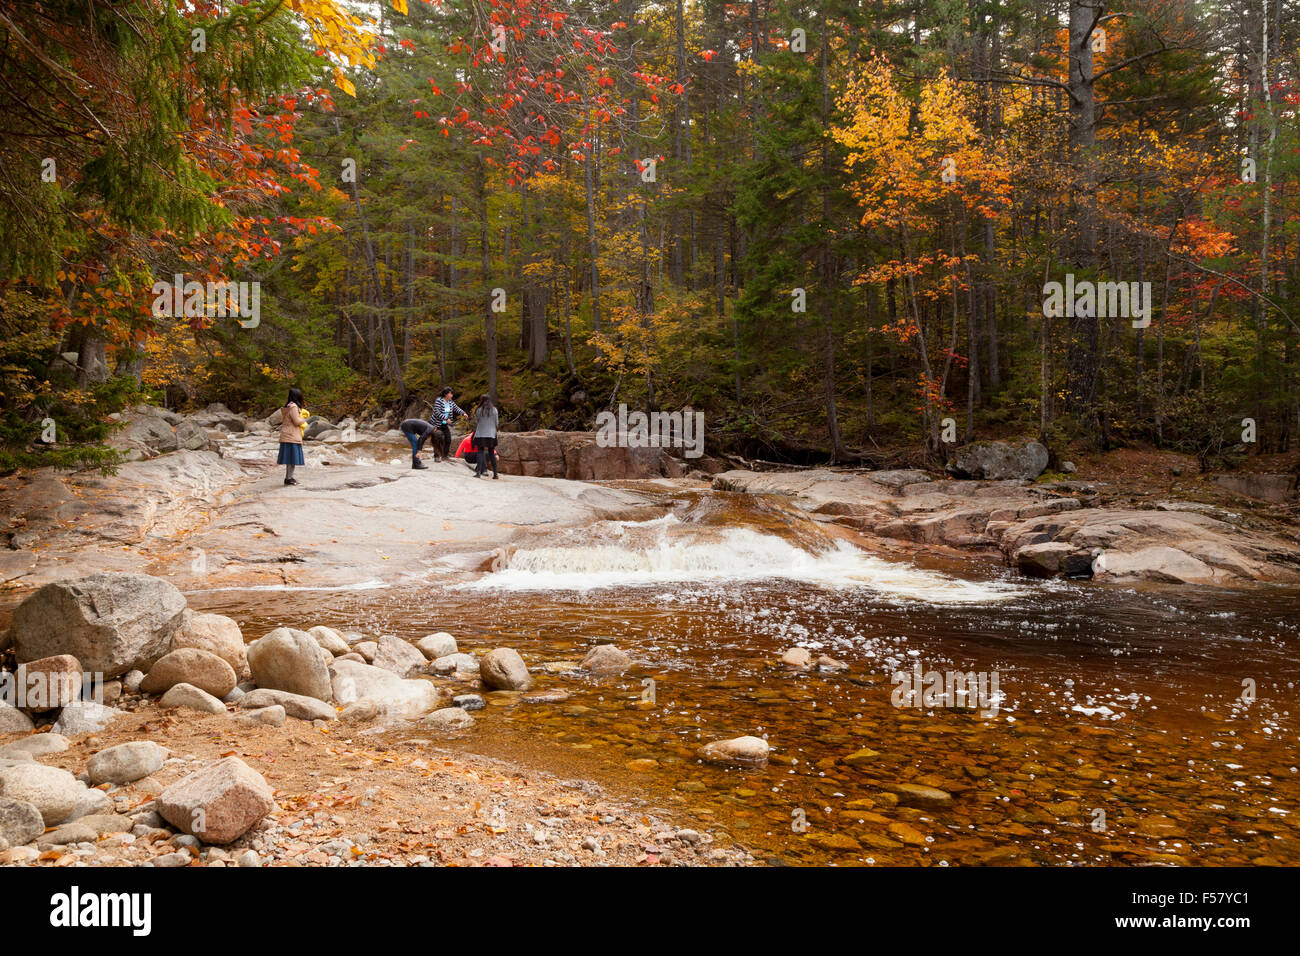 Tourists at the Pemigewasset River, Kancamagus Highway, White Mountain National Forest New Hampshire New England in autumn, USA Stock Photo